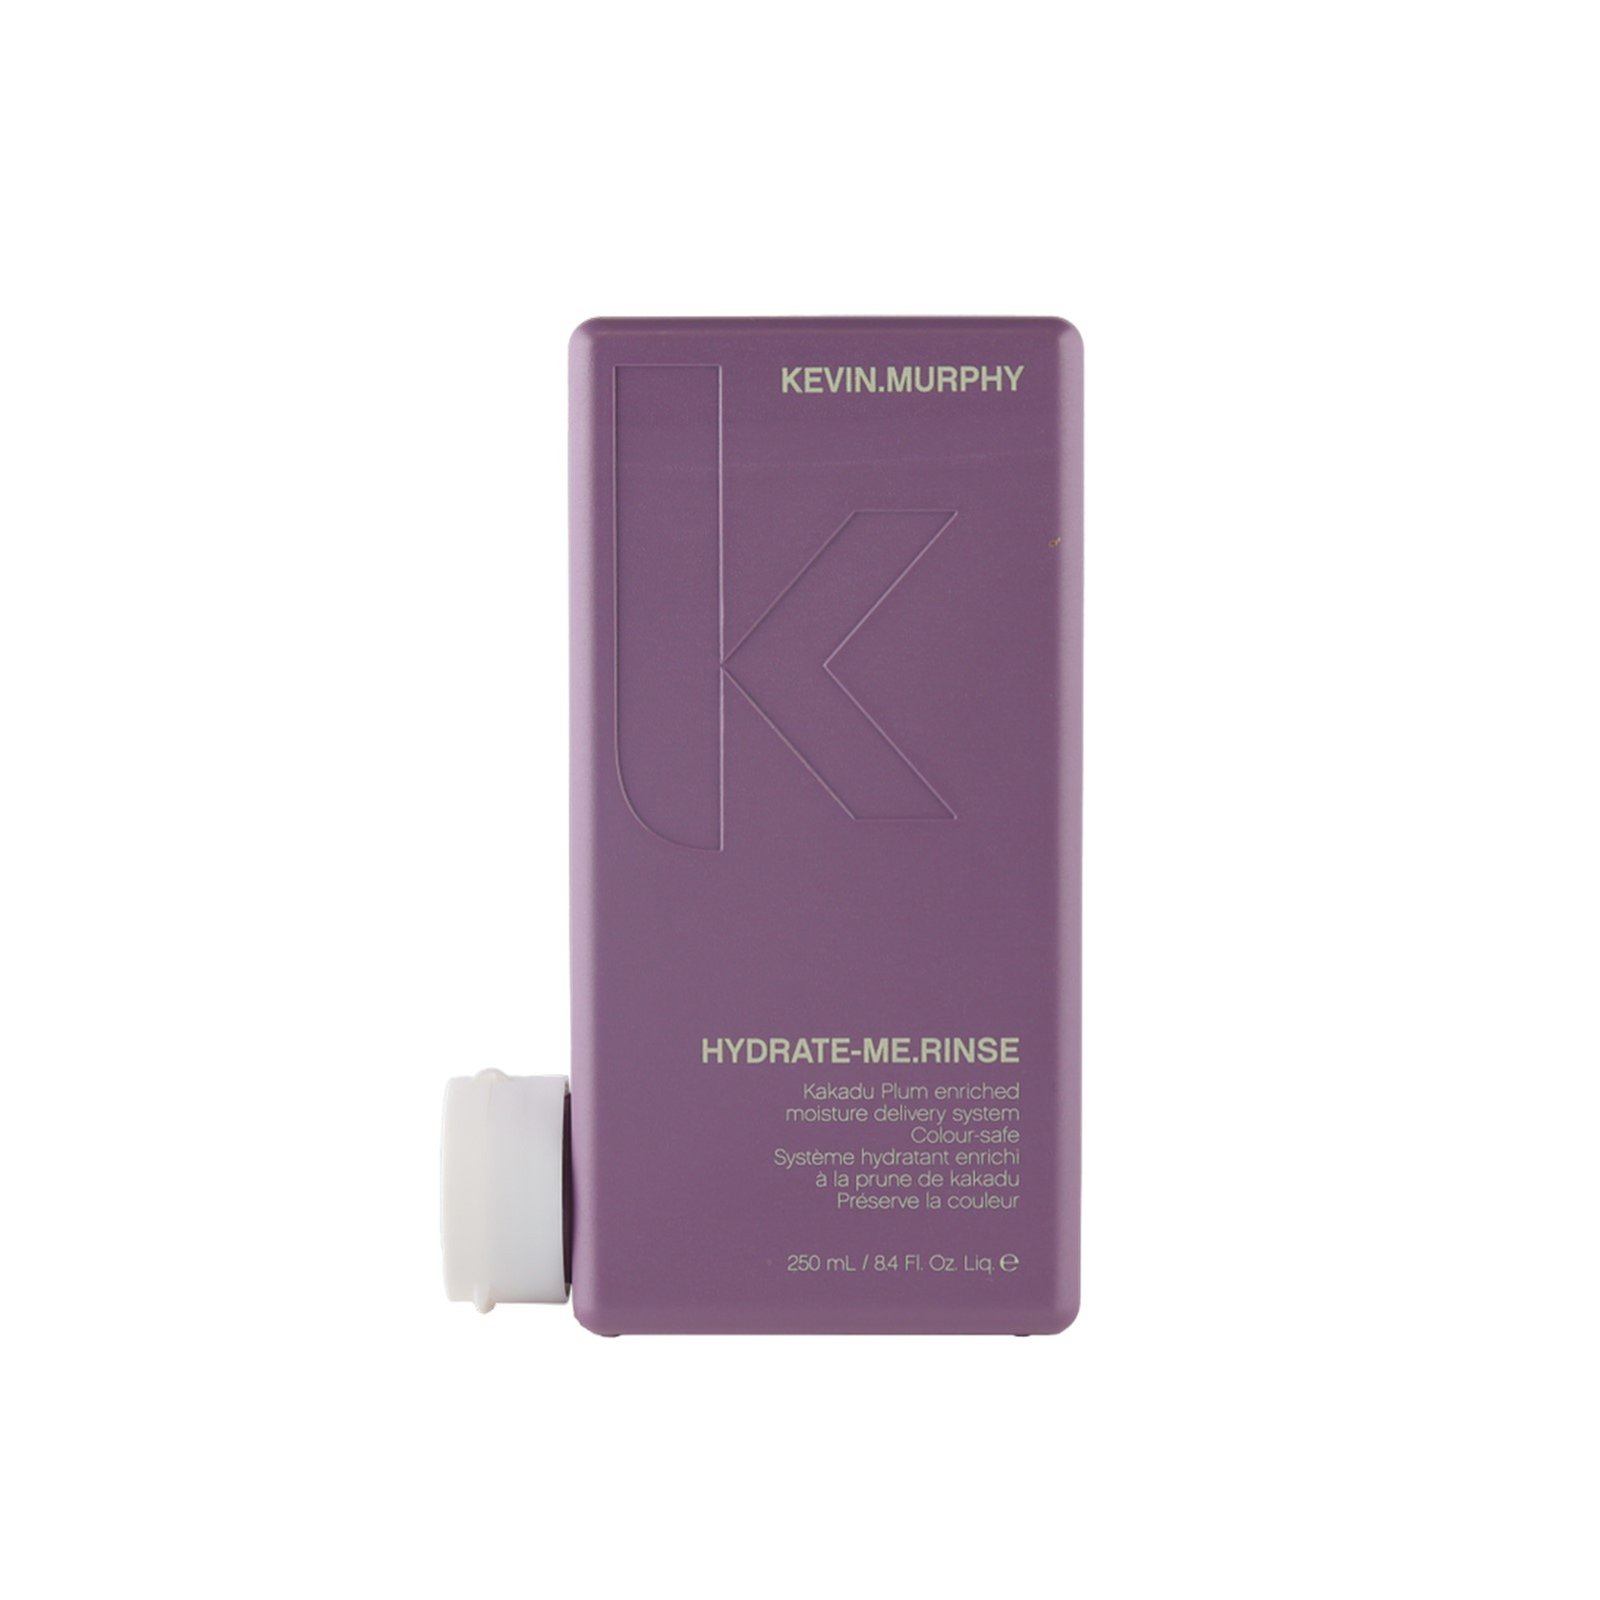 Kevin Murphy Hydrate-Me Rinse Conditioner 250ml (8.4 fl oz)